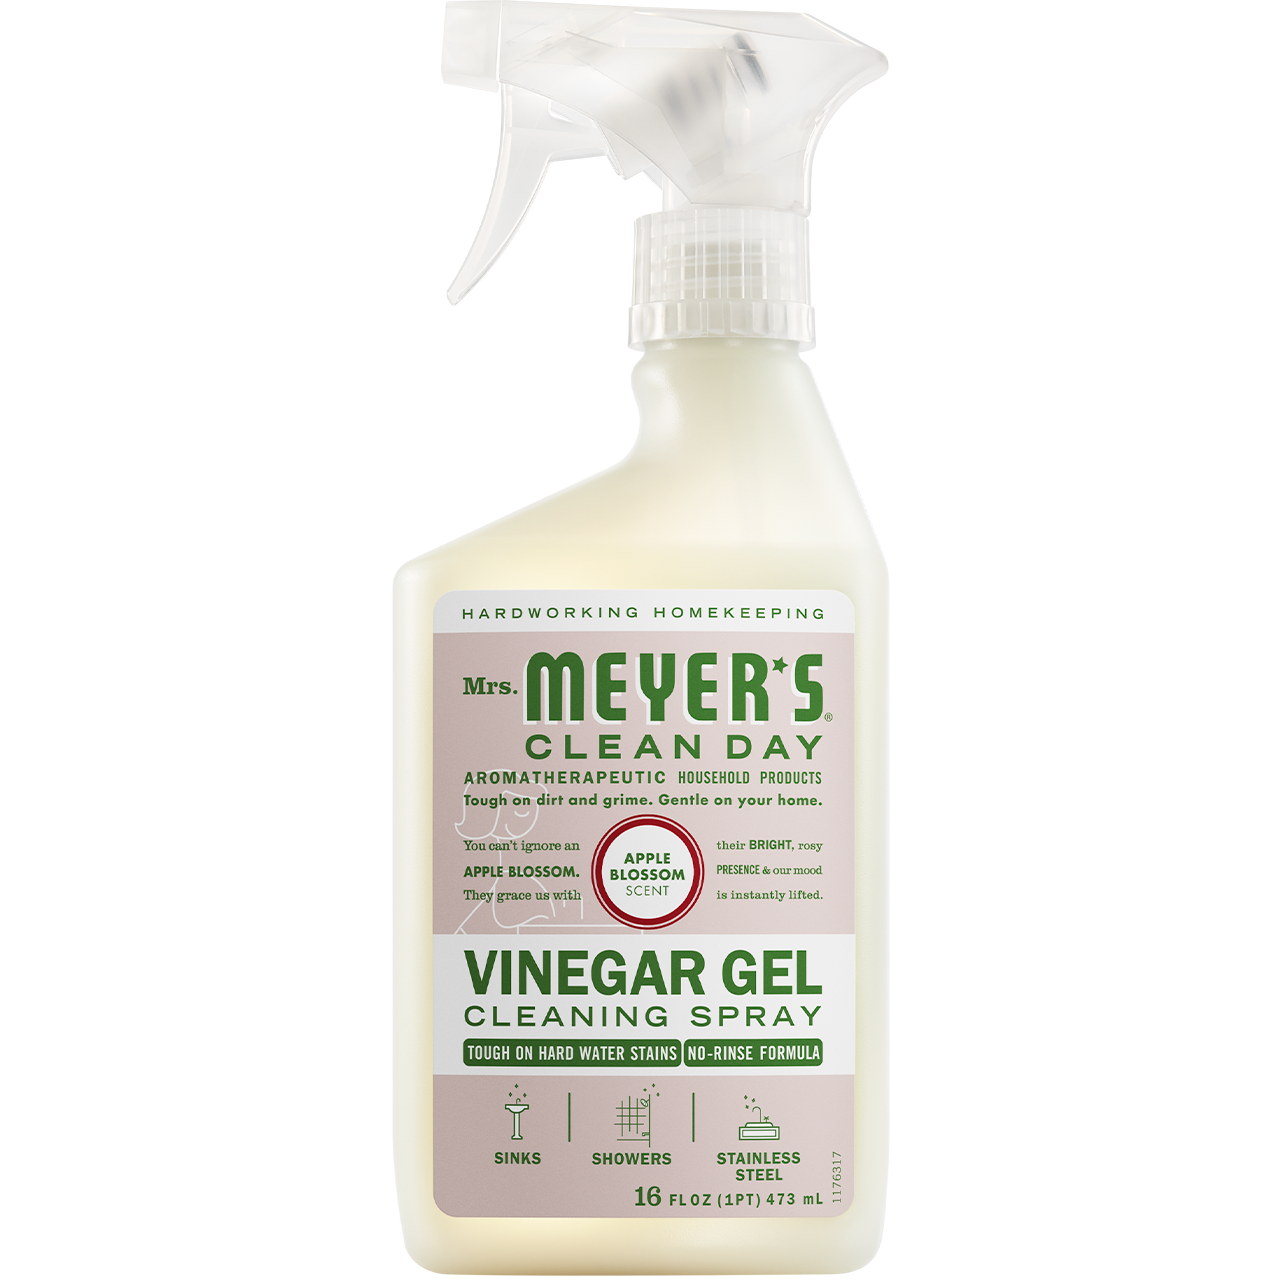 https://cdn11.bigcommerce.com/s-lxgmmudw7i/images/stencil/1280x1280/products/1060/2584/mrs-meyers-apple-blossom-vinegar-gel-cleaning-spray__34951.1696258473.png?c=2